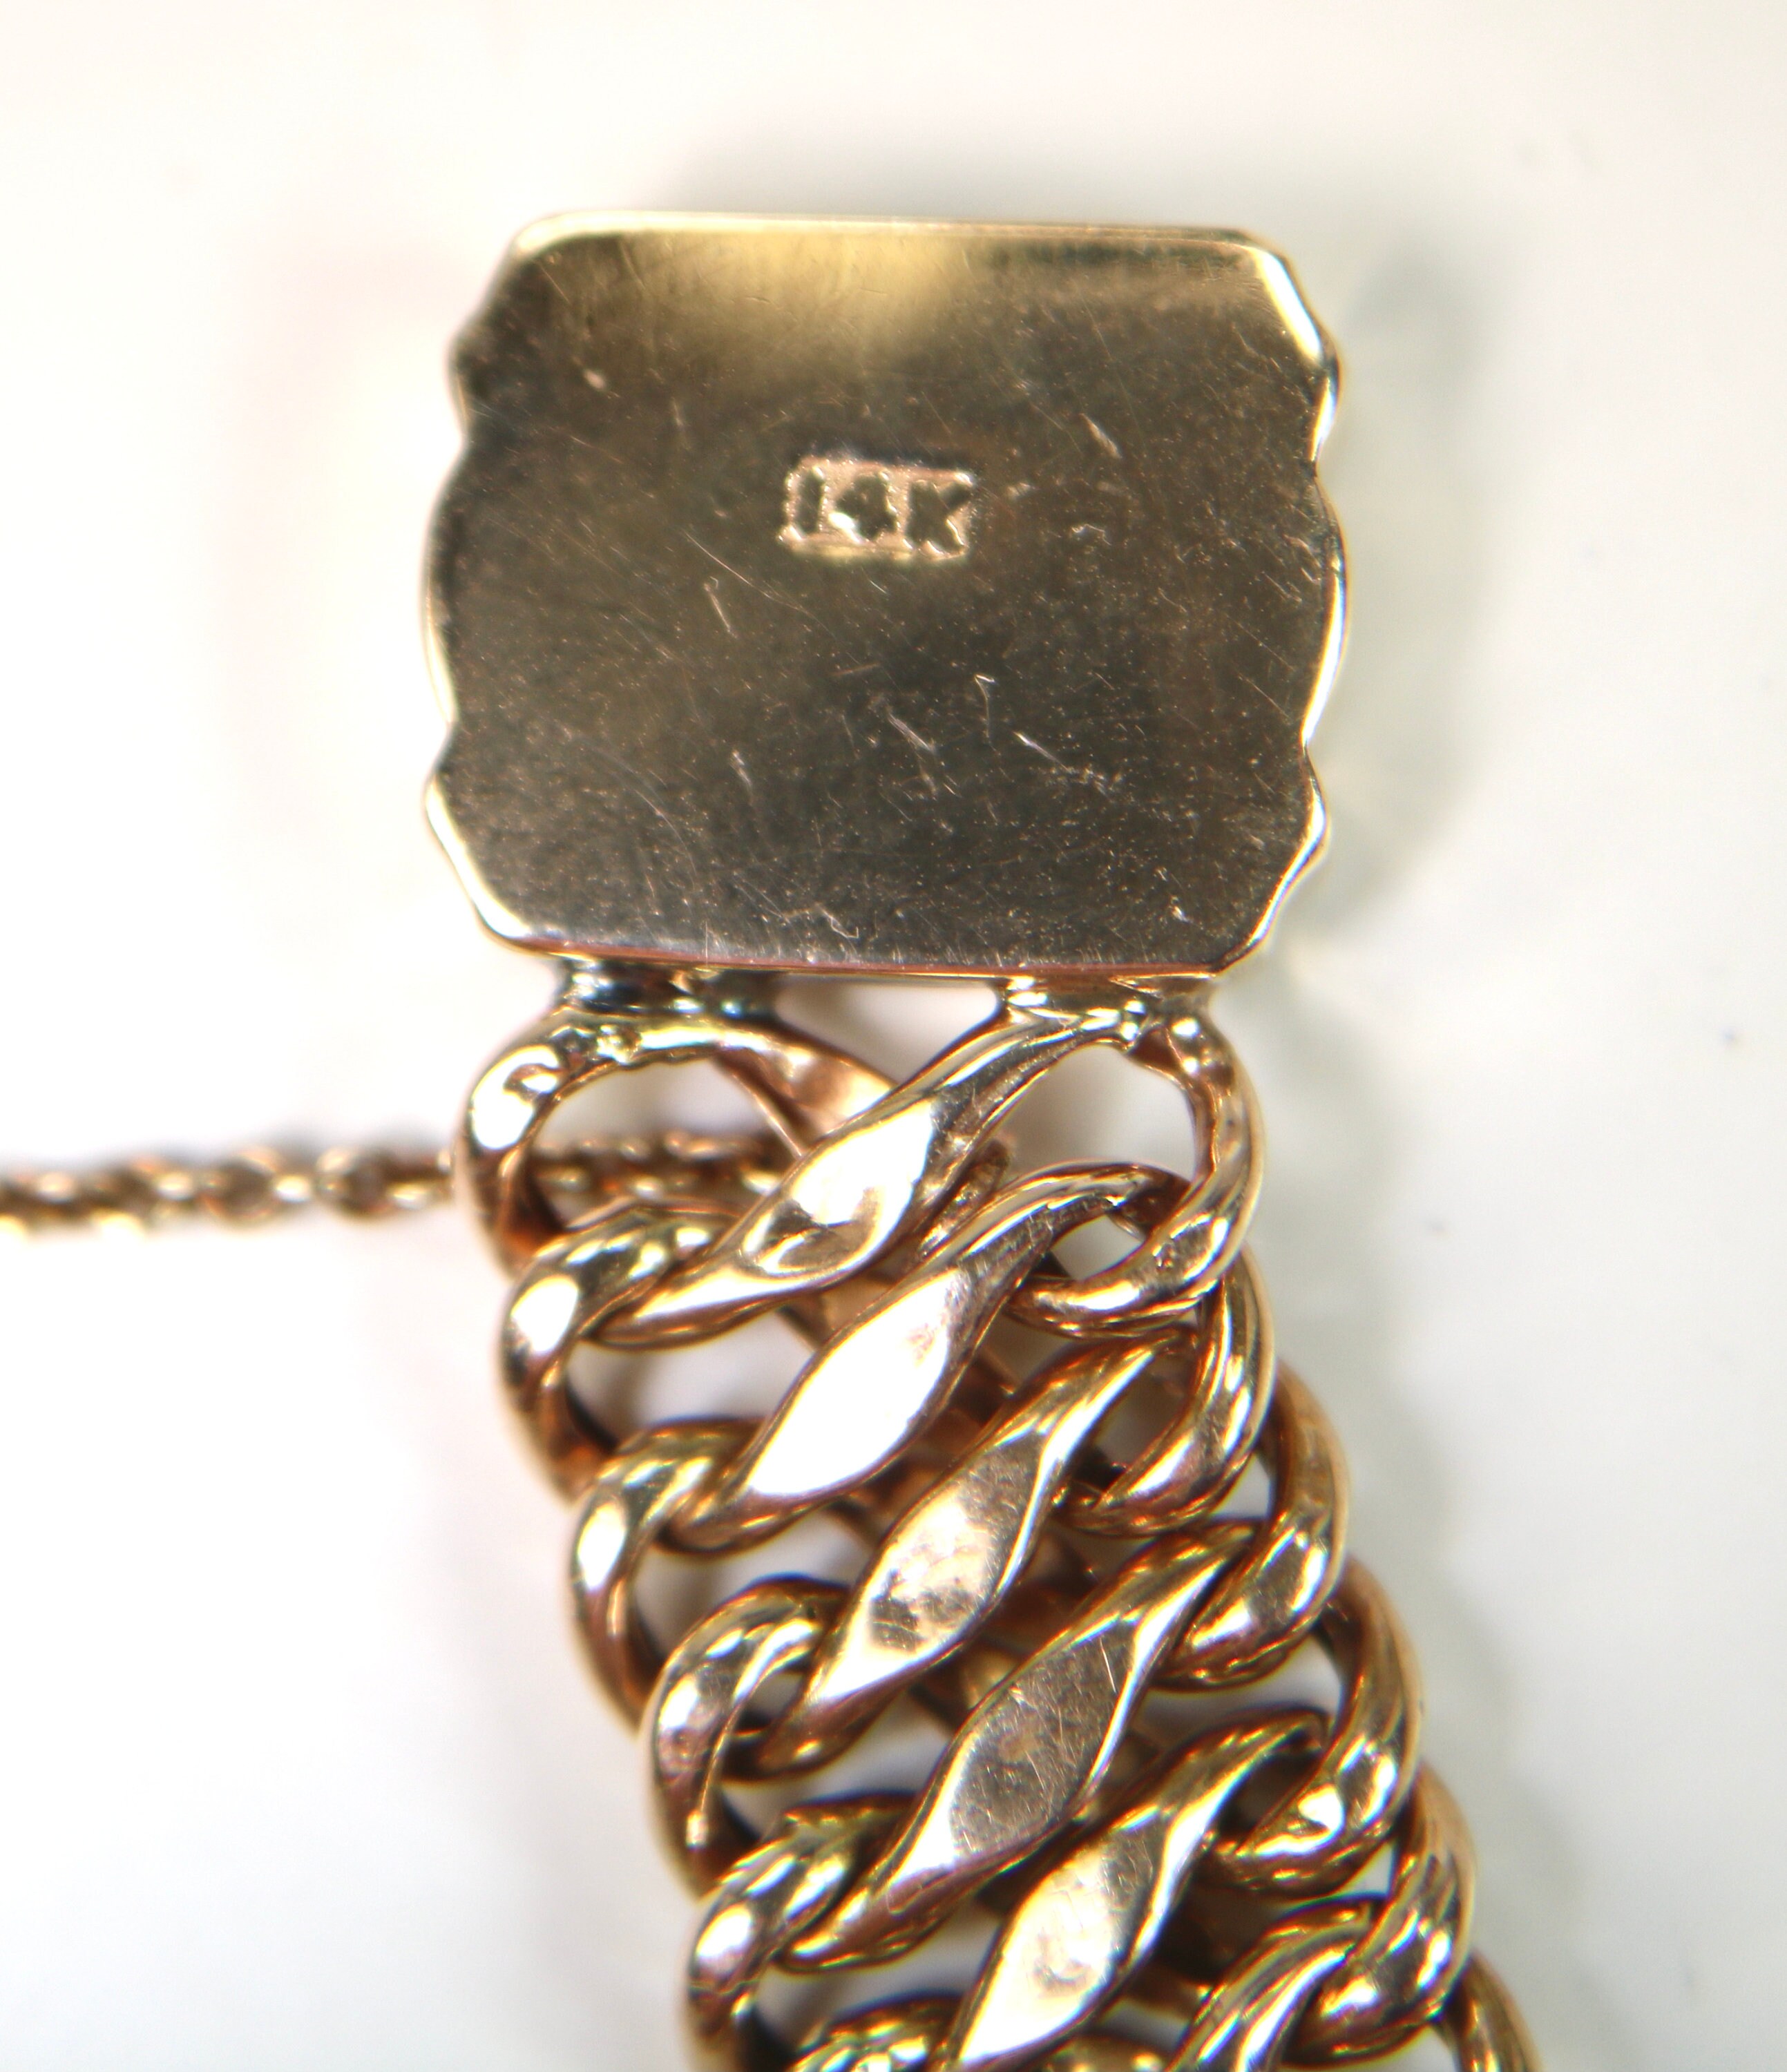 Vintage 14K Yellow Gold Link Charm Bracelet With 2 Big Charms 1 Locket  Charm 67/8 Closed Length C1950s 